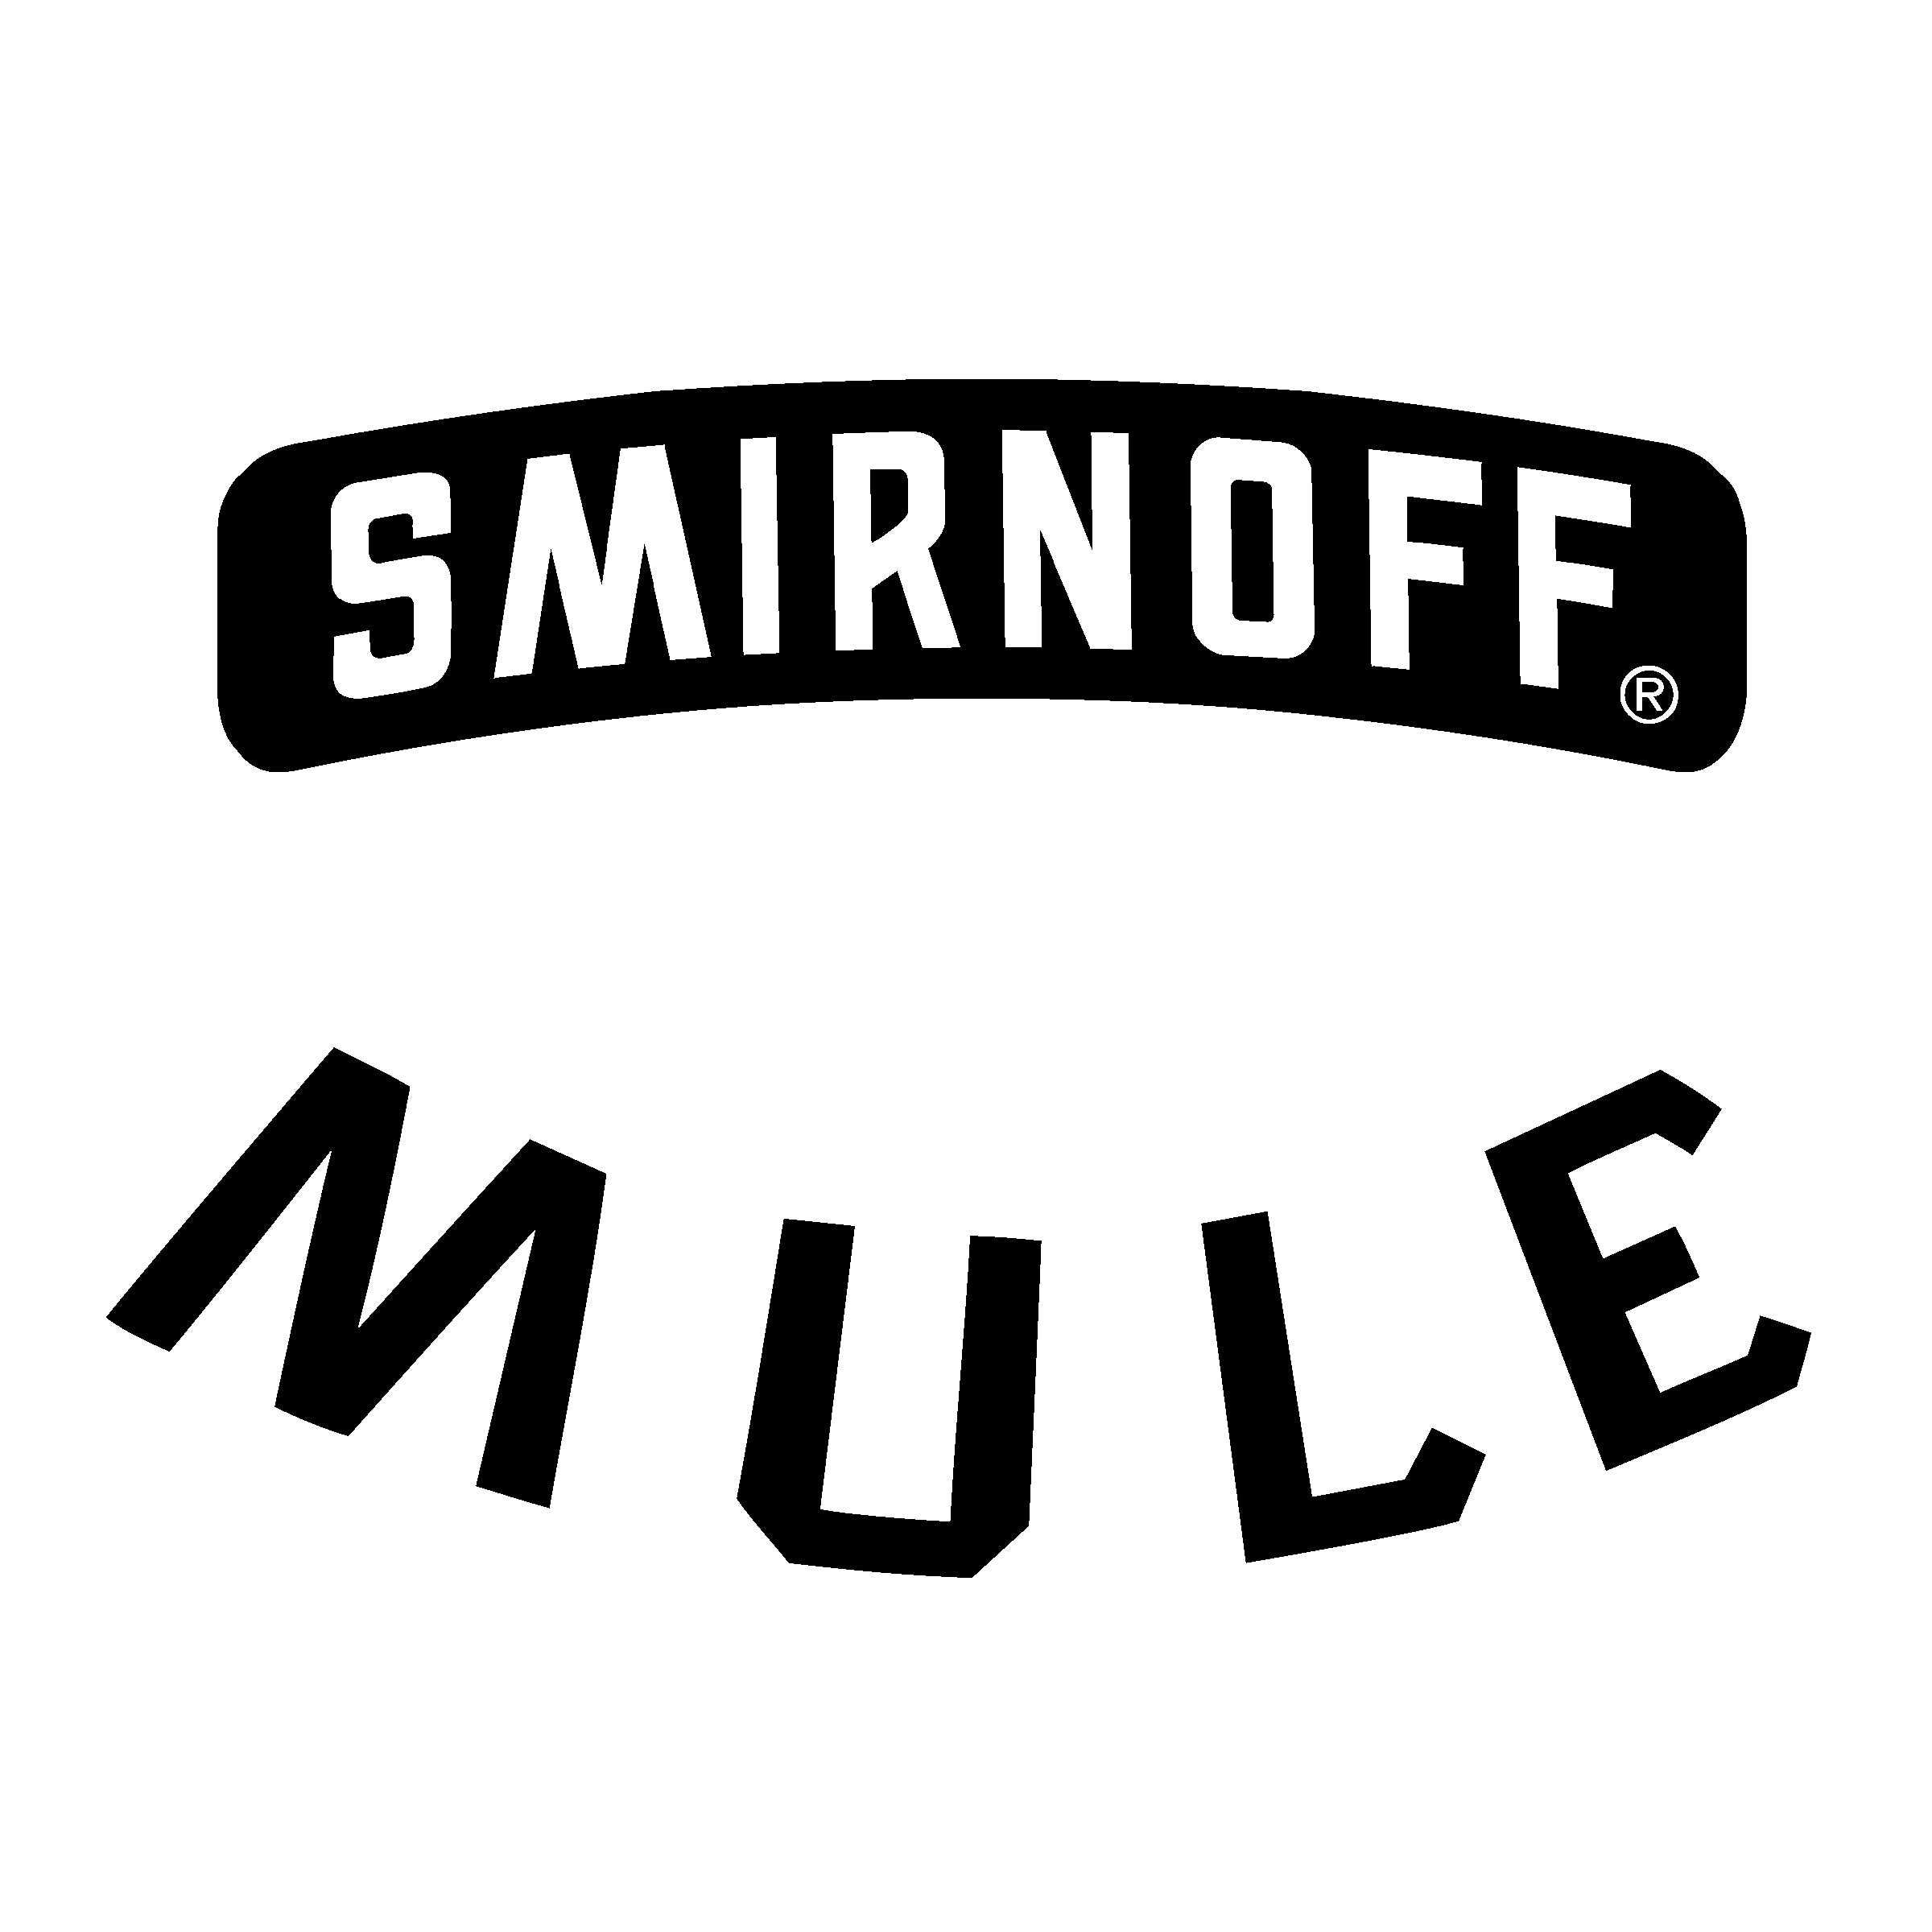 Black And White Mule PNG - 149240